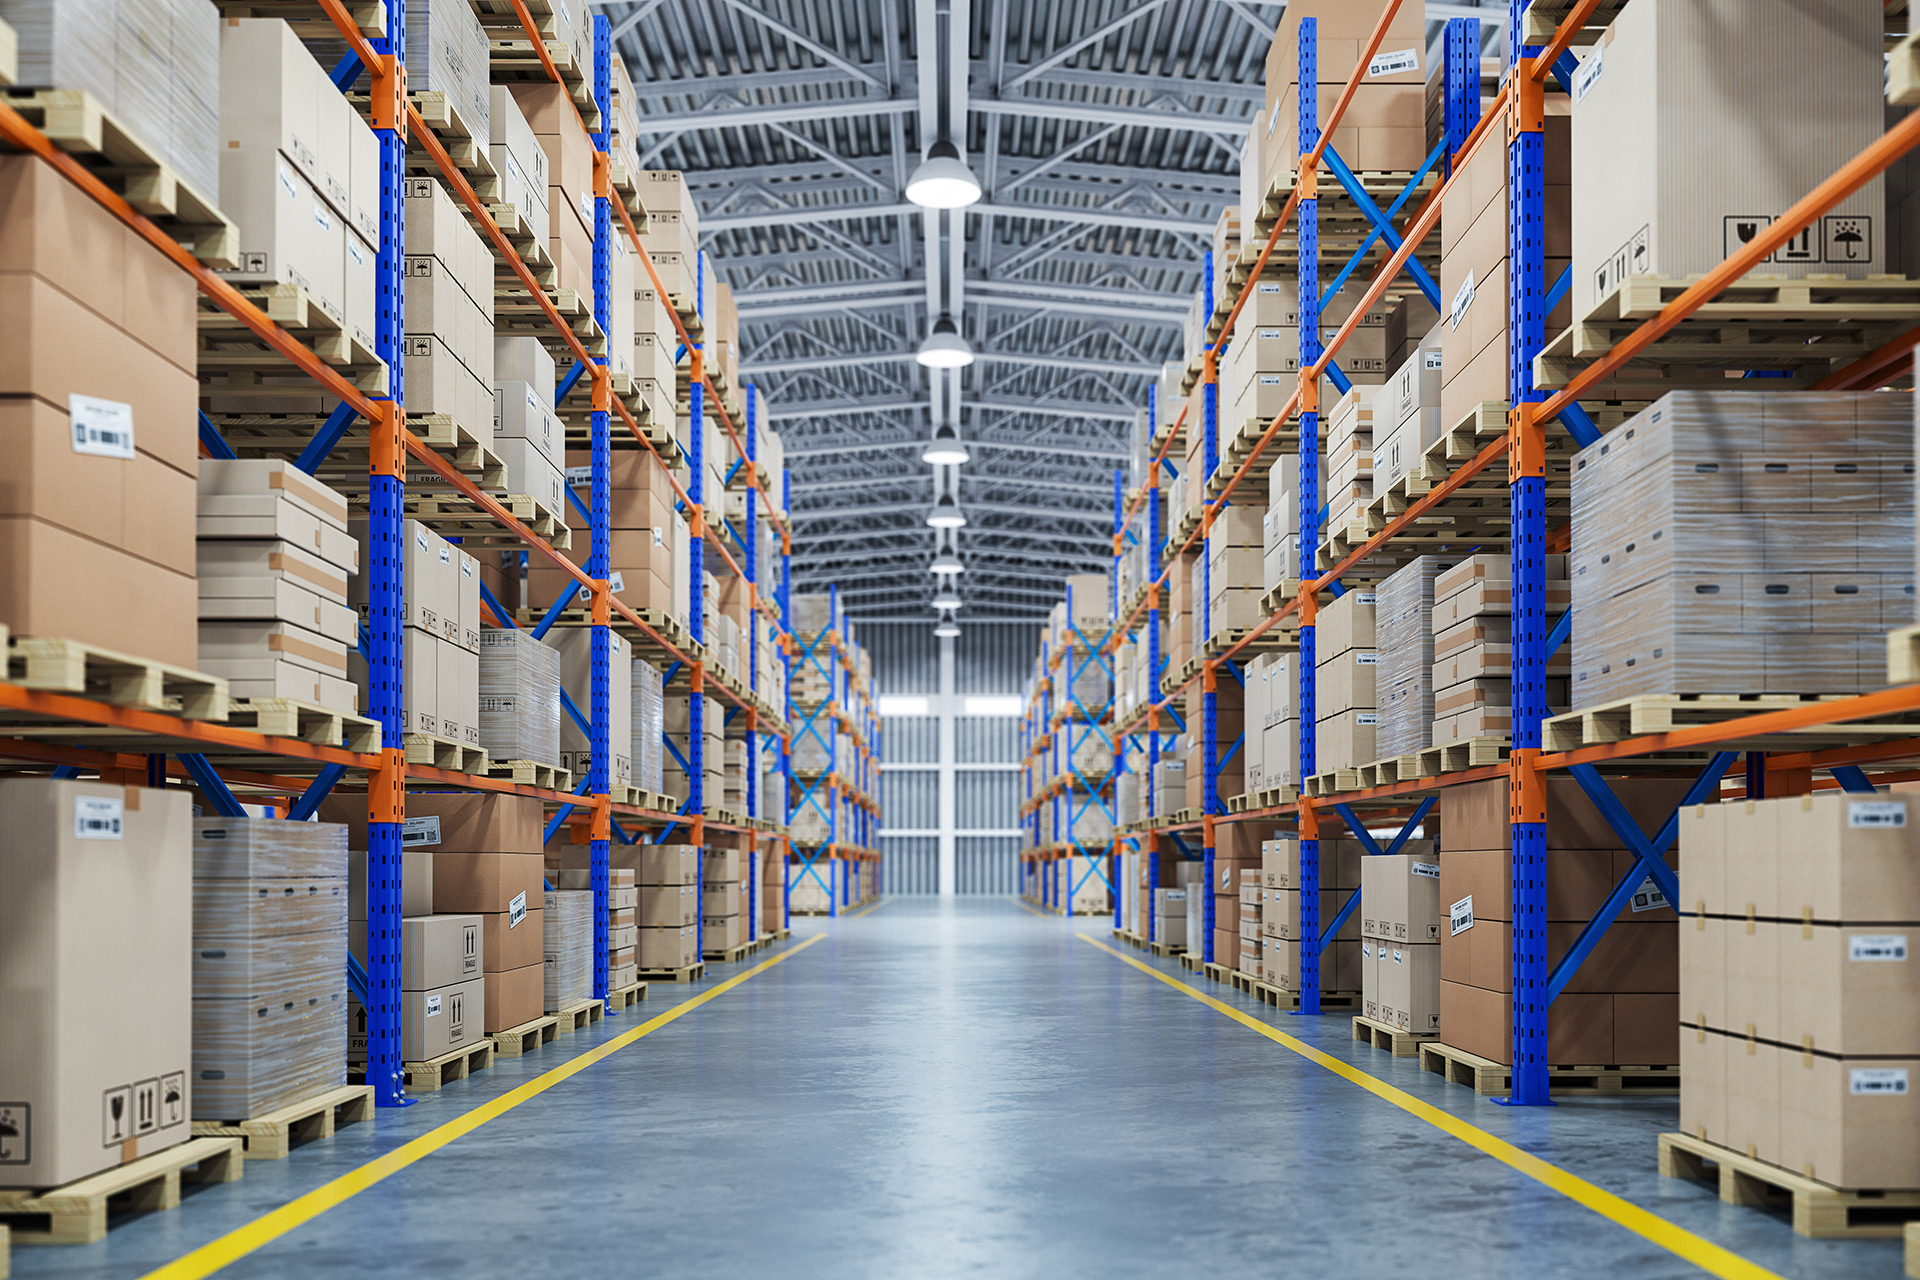 Industrial, logistics, and warehousing